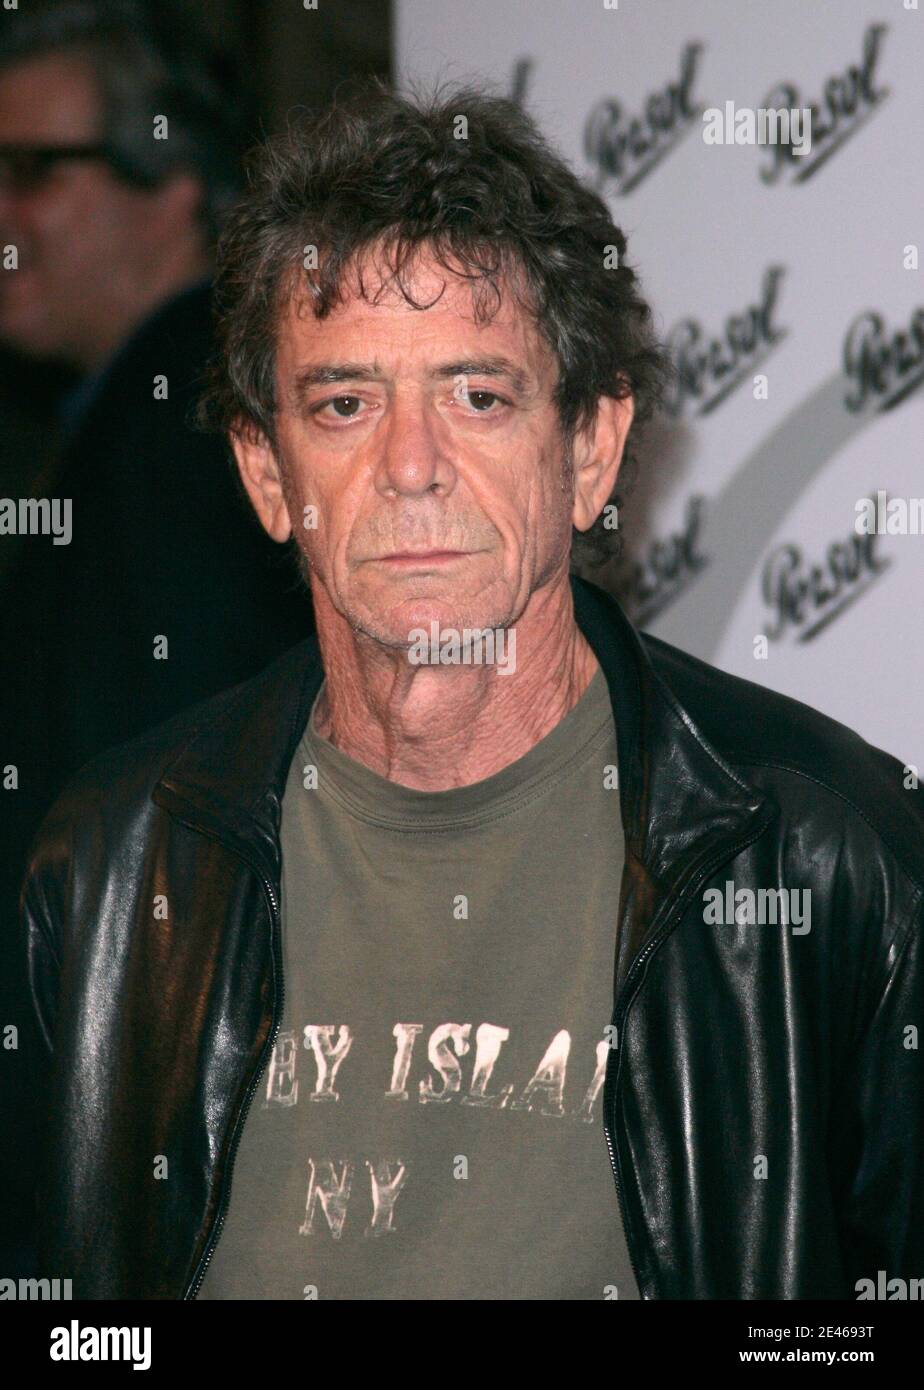 Singer Lou Reed arriving at the 'Incognito Design Exhibition' at the Whitney Museum of American Art in New York City, NY, USA on June 23, 2009. Photo by Donna Ward/ABACAPRESS.COM Stock Photo